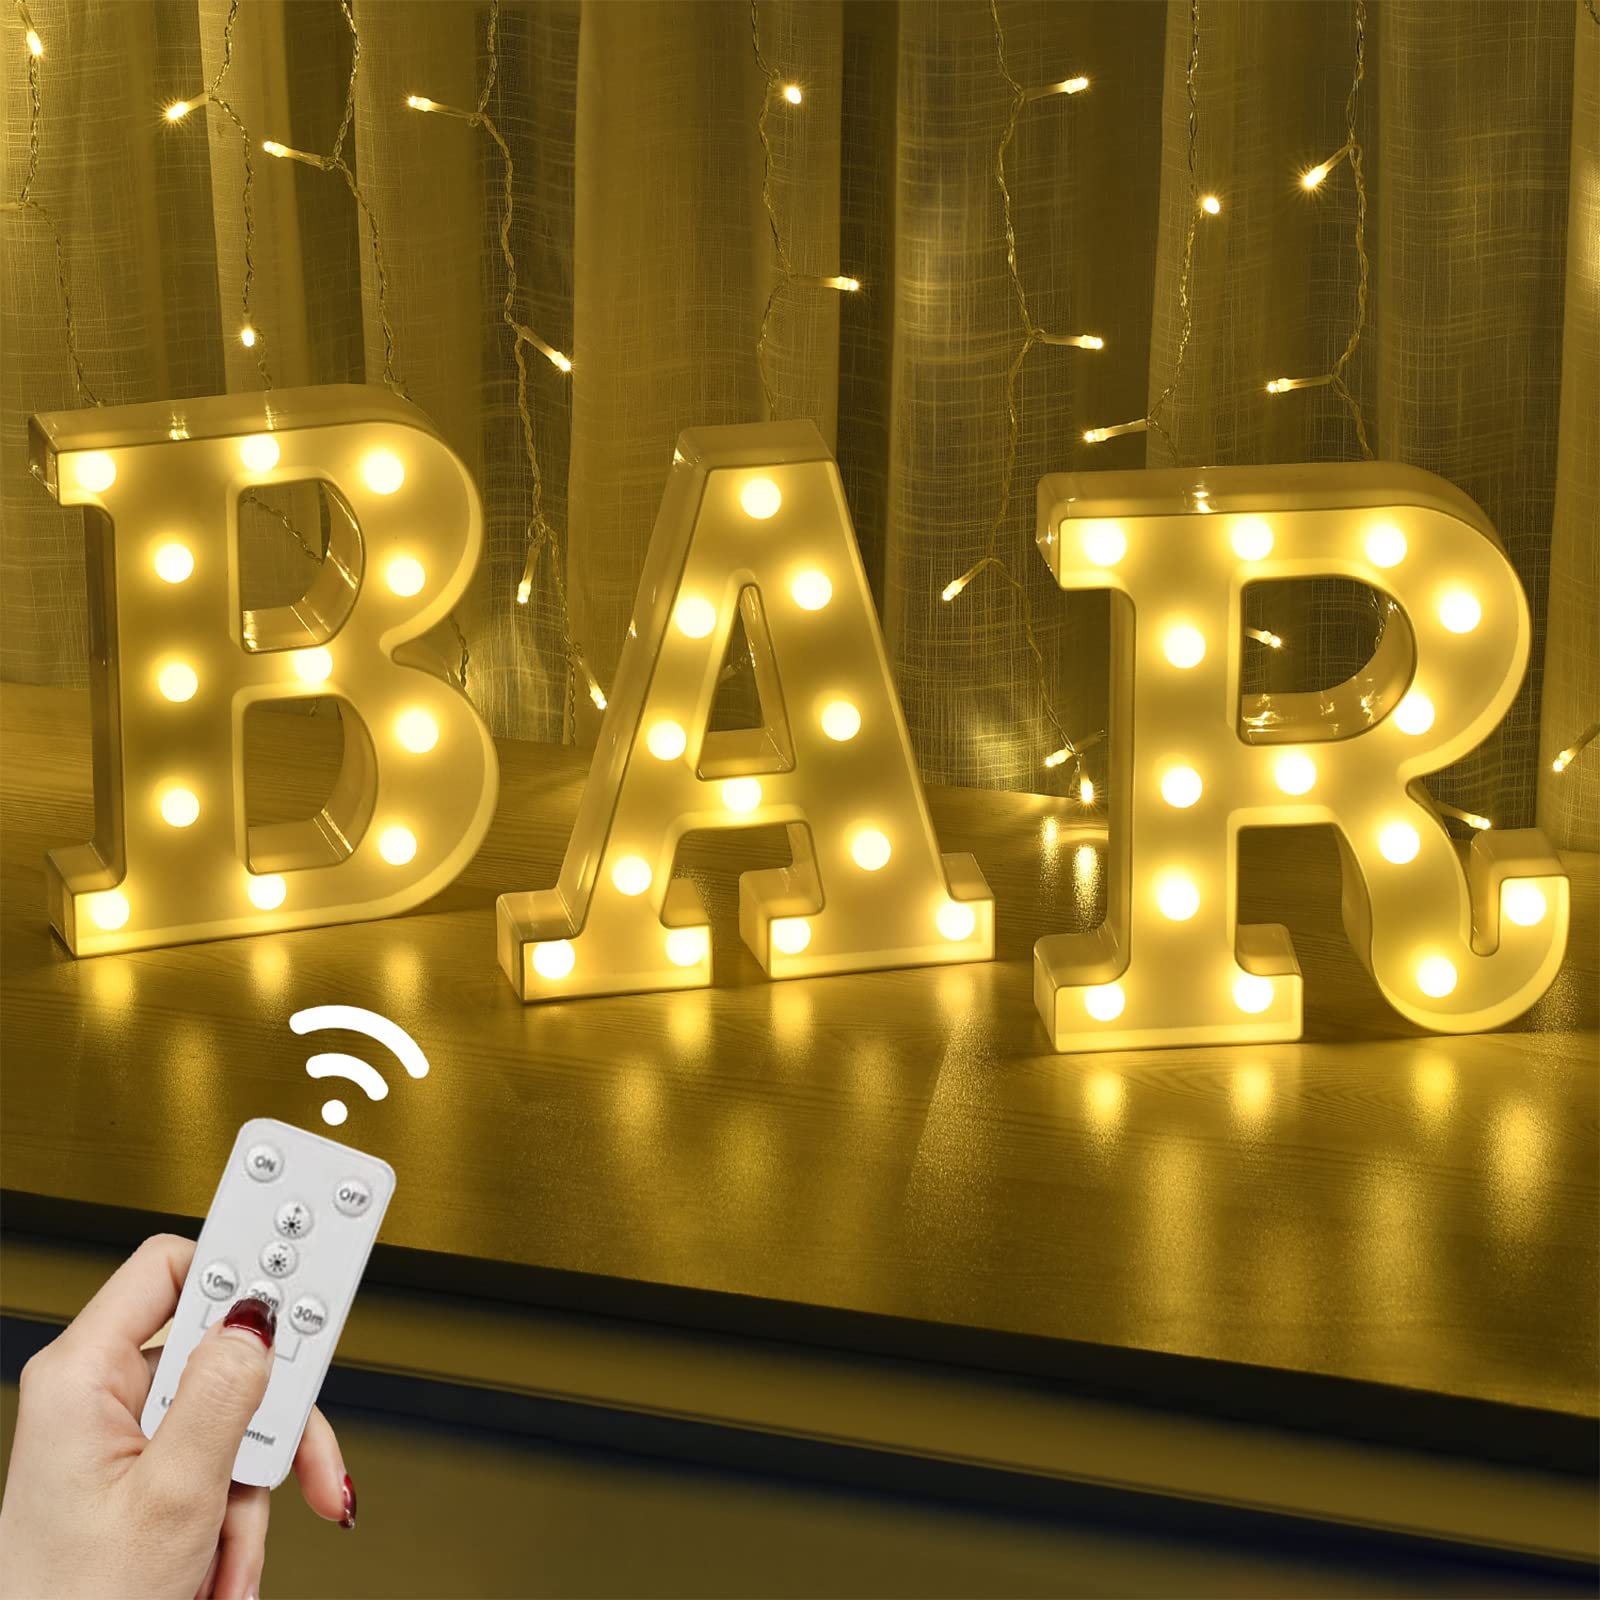 LED Marquee Letters Lights BAR Signs with Remote Control Letter Lamp Light Up Letters Decoration Battery Powered for BAR Pub Home Party Wedding Wall